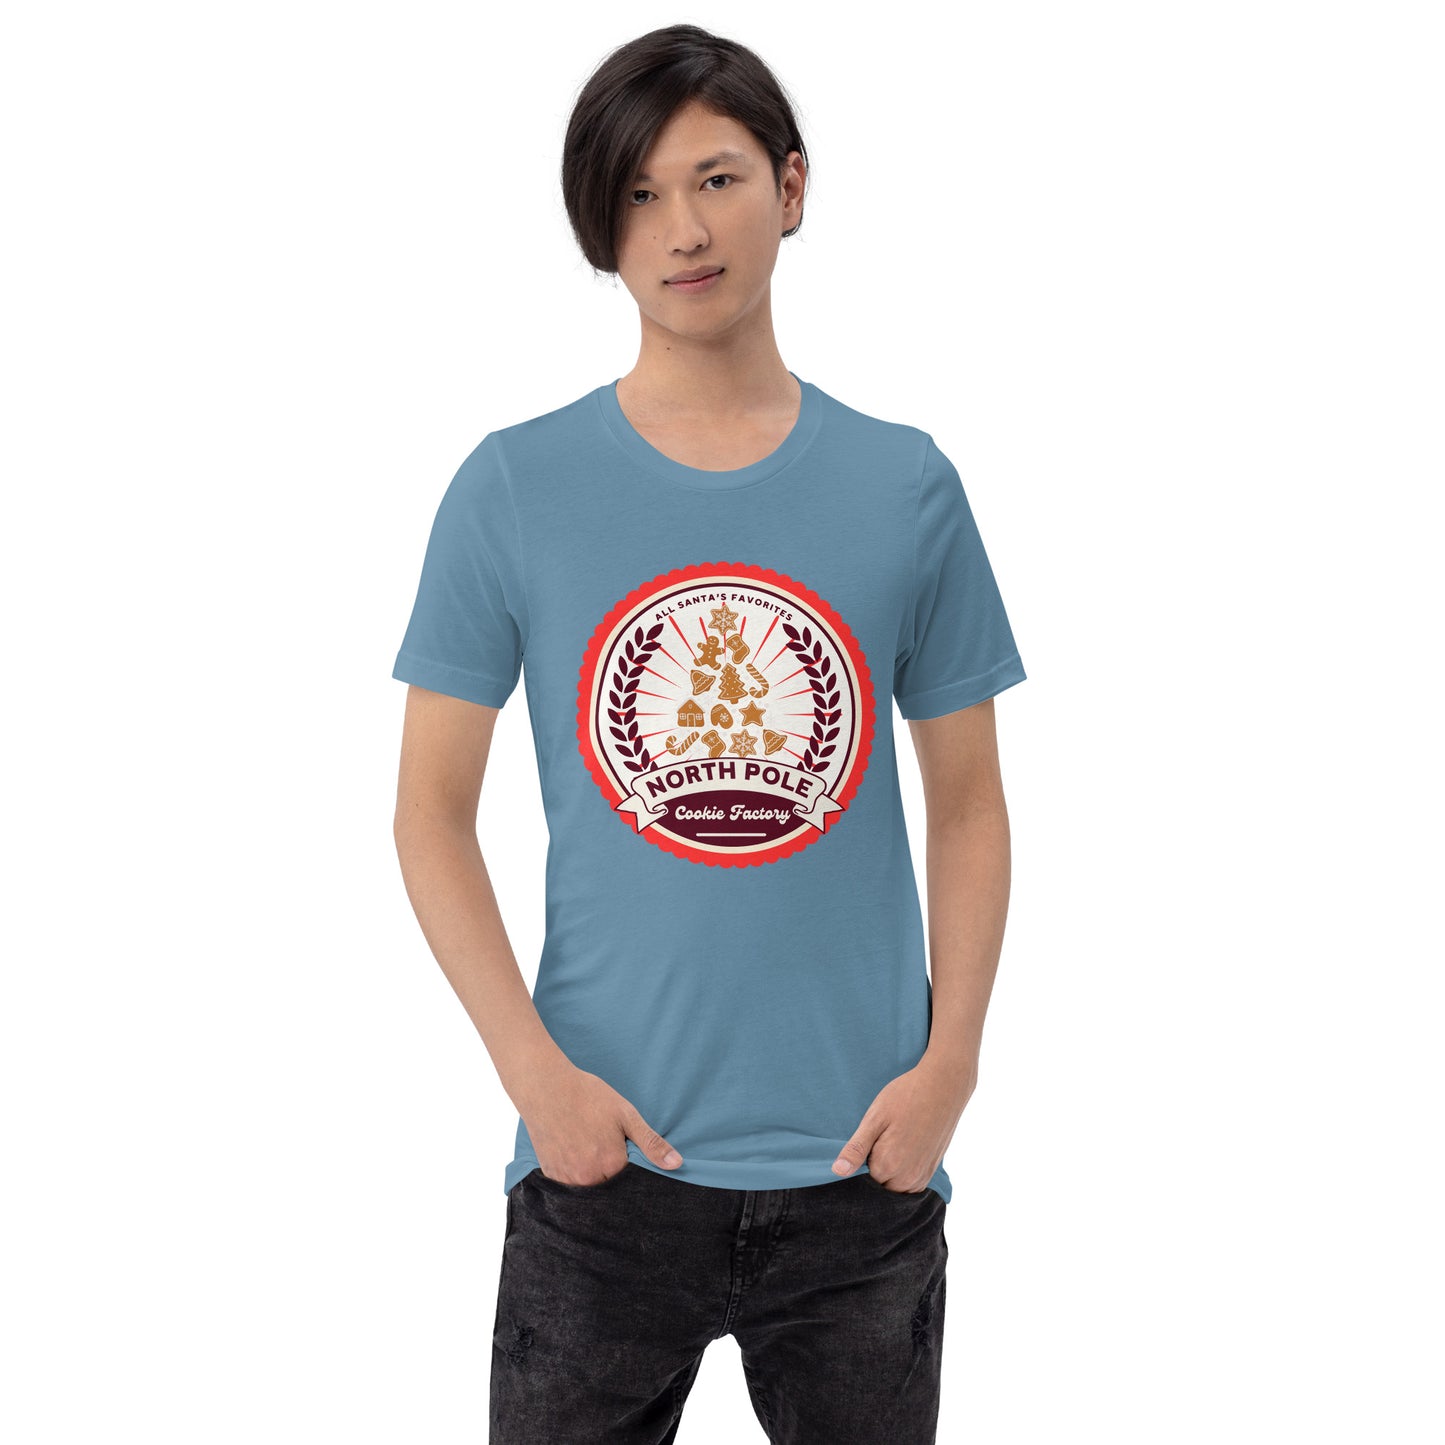 North Pole Cookies t-shirt